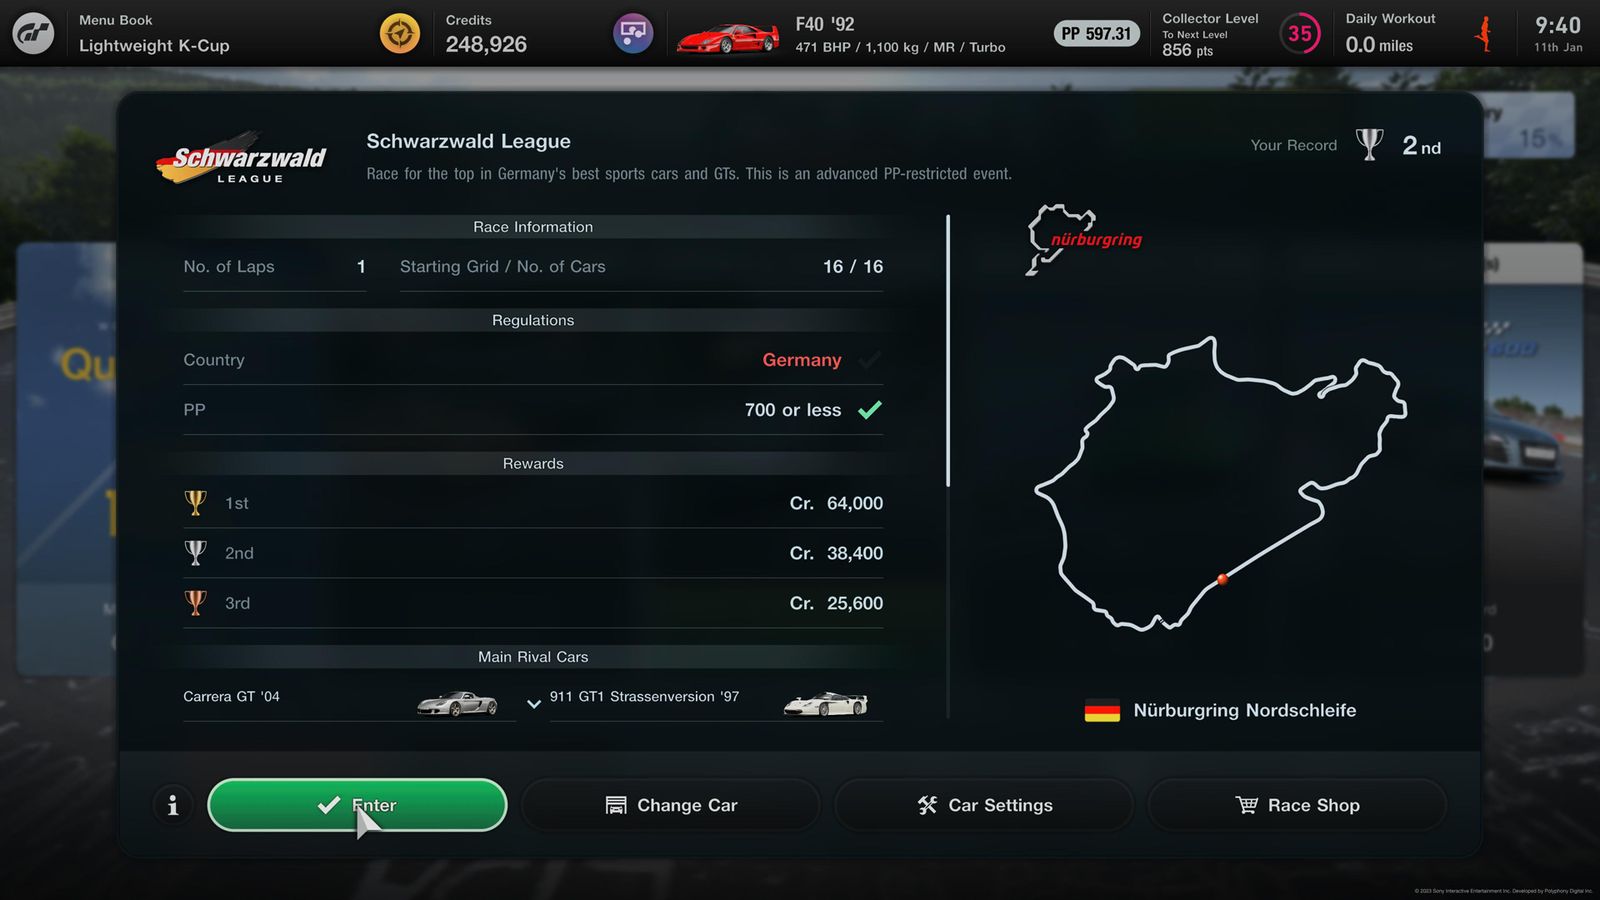 Gran Turismo 7 Weekly Challenges 11 January Schwarzwald League